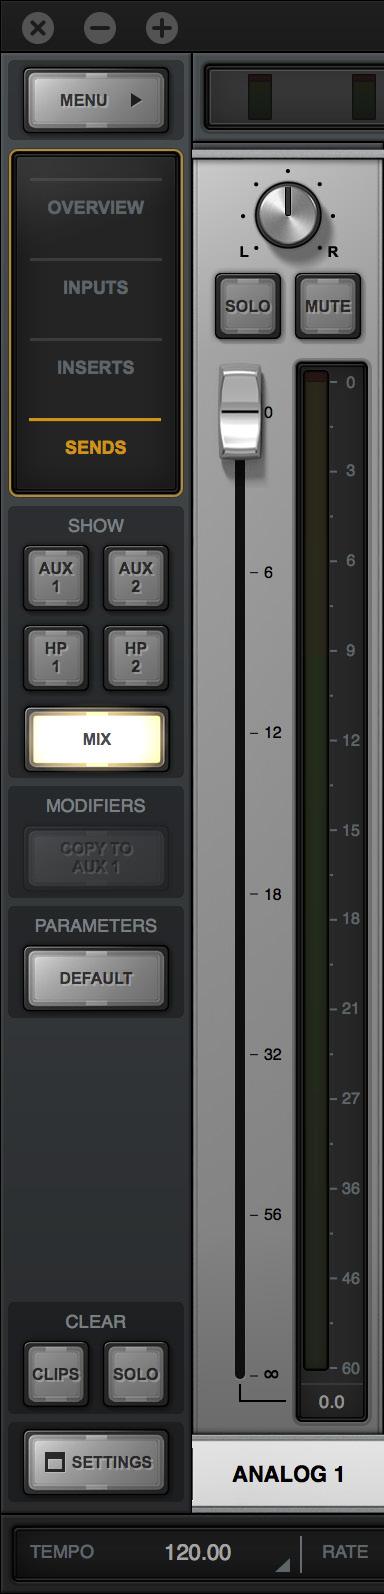 If the SHOW MONITOR switch is disengaged, only the send s mix controls are visible, offering maximum send fader resolution (center screenshot).